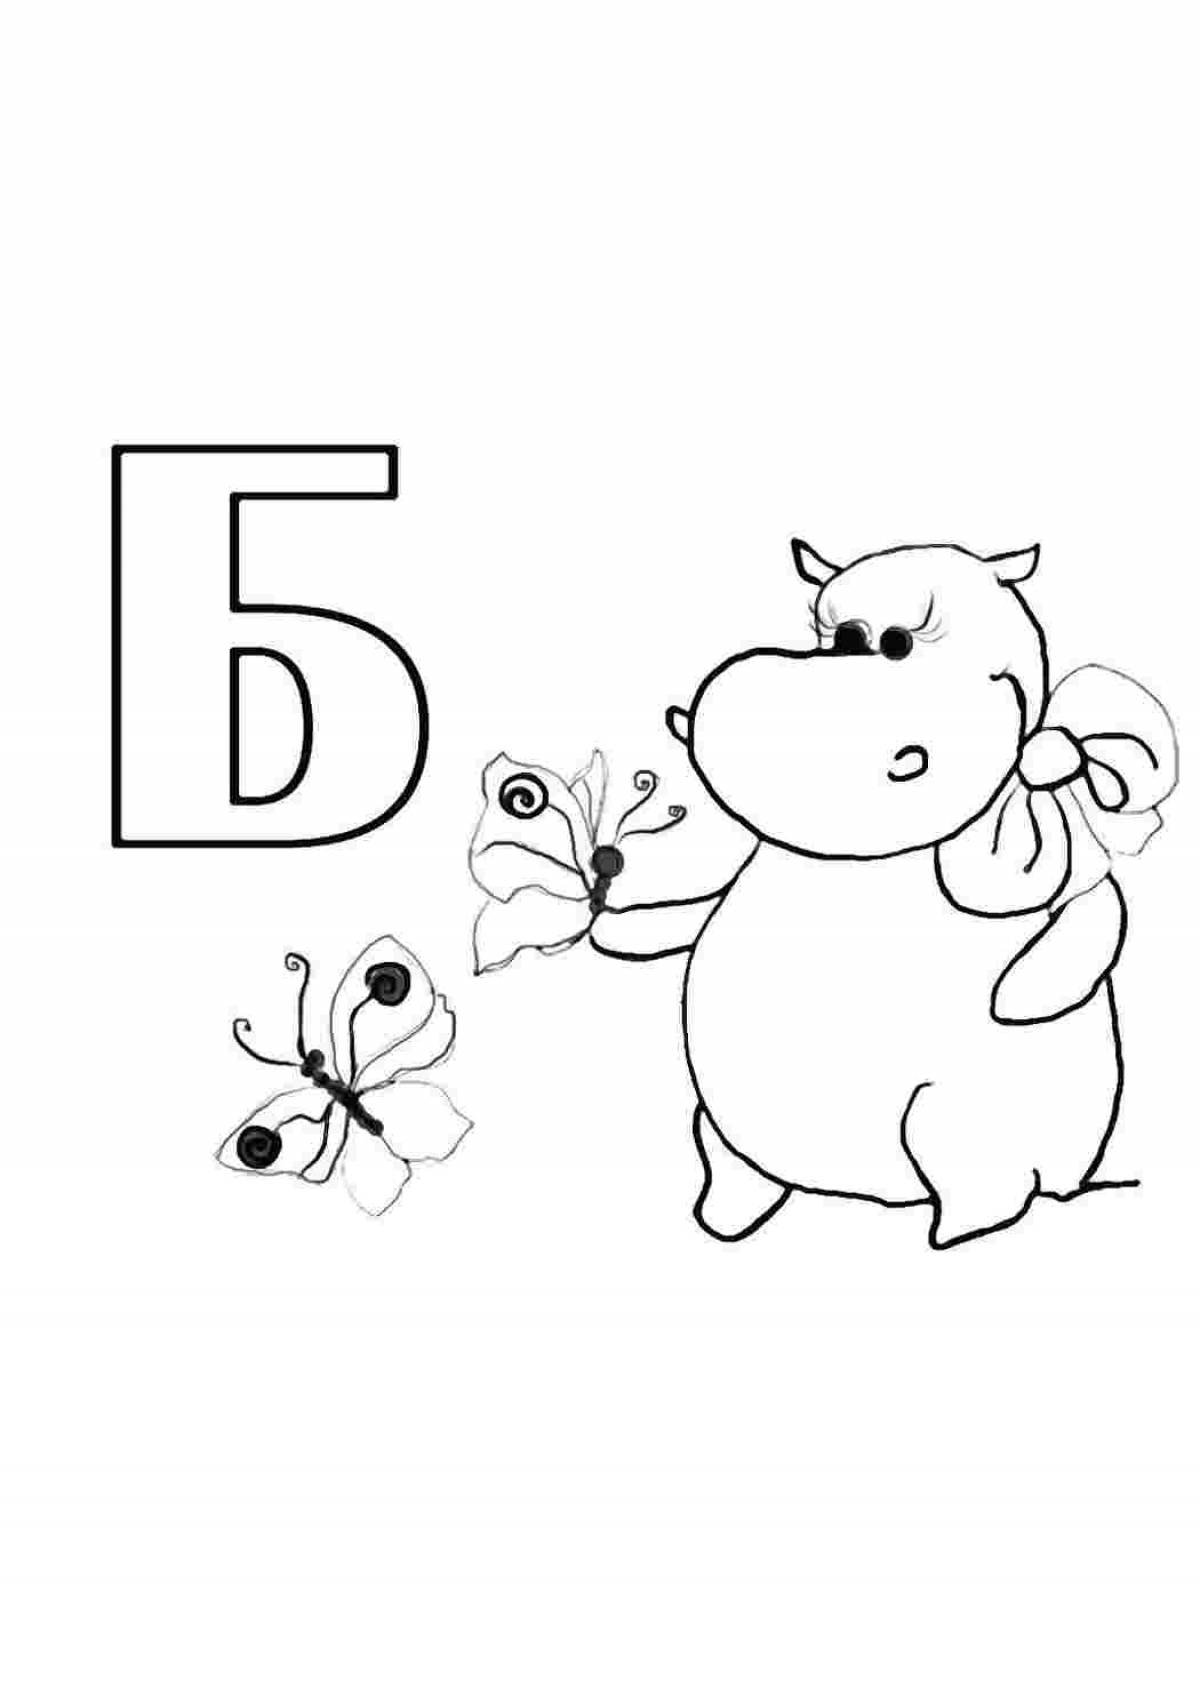 Coloring pages letter n for preschoolers